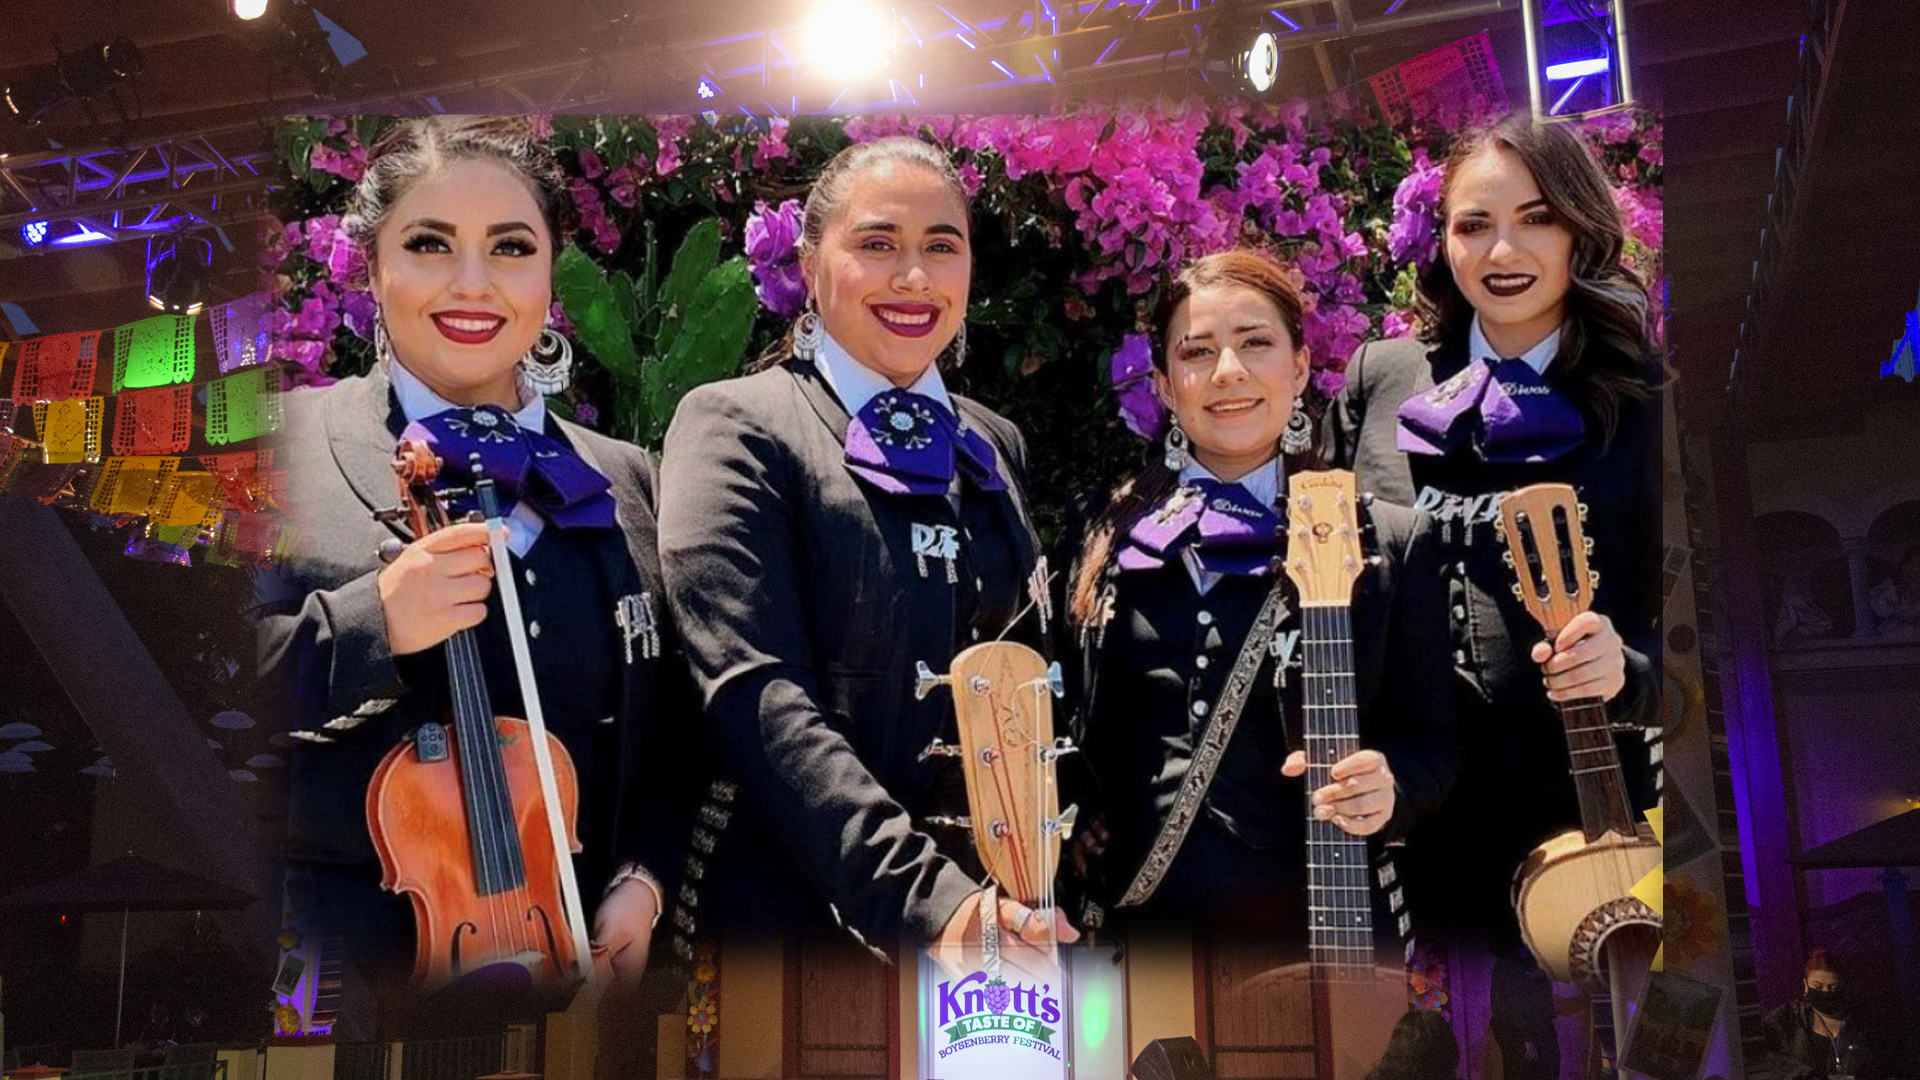 Knott’s Berry Farm Expands Musical Entertainment at the Taste of Boysenberry Festival with Mariachi Divas